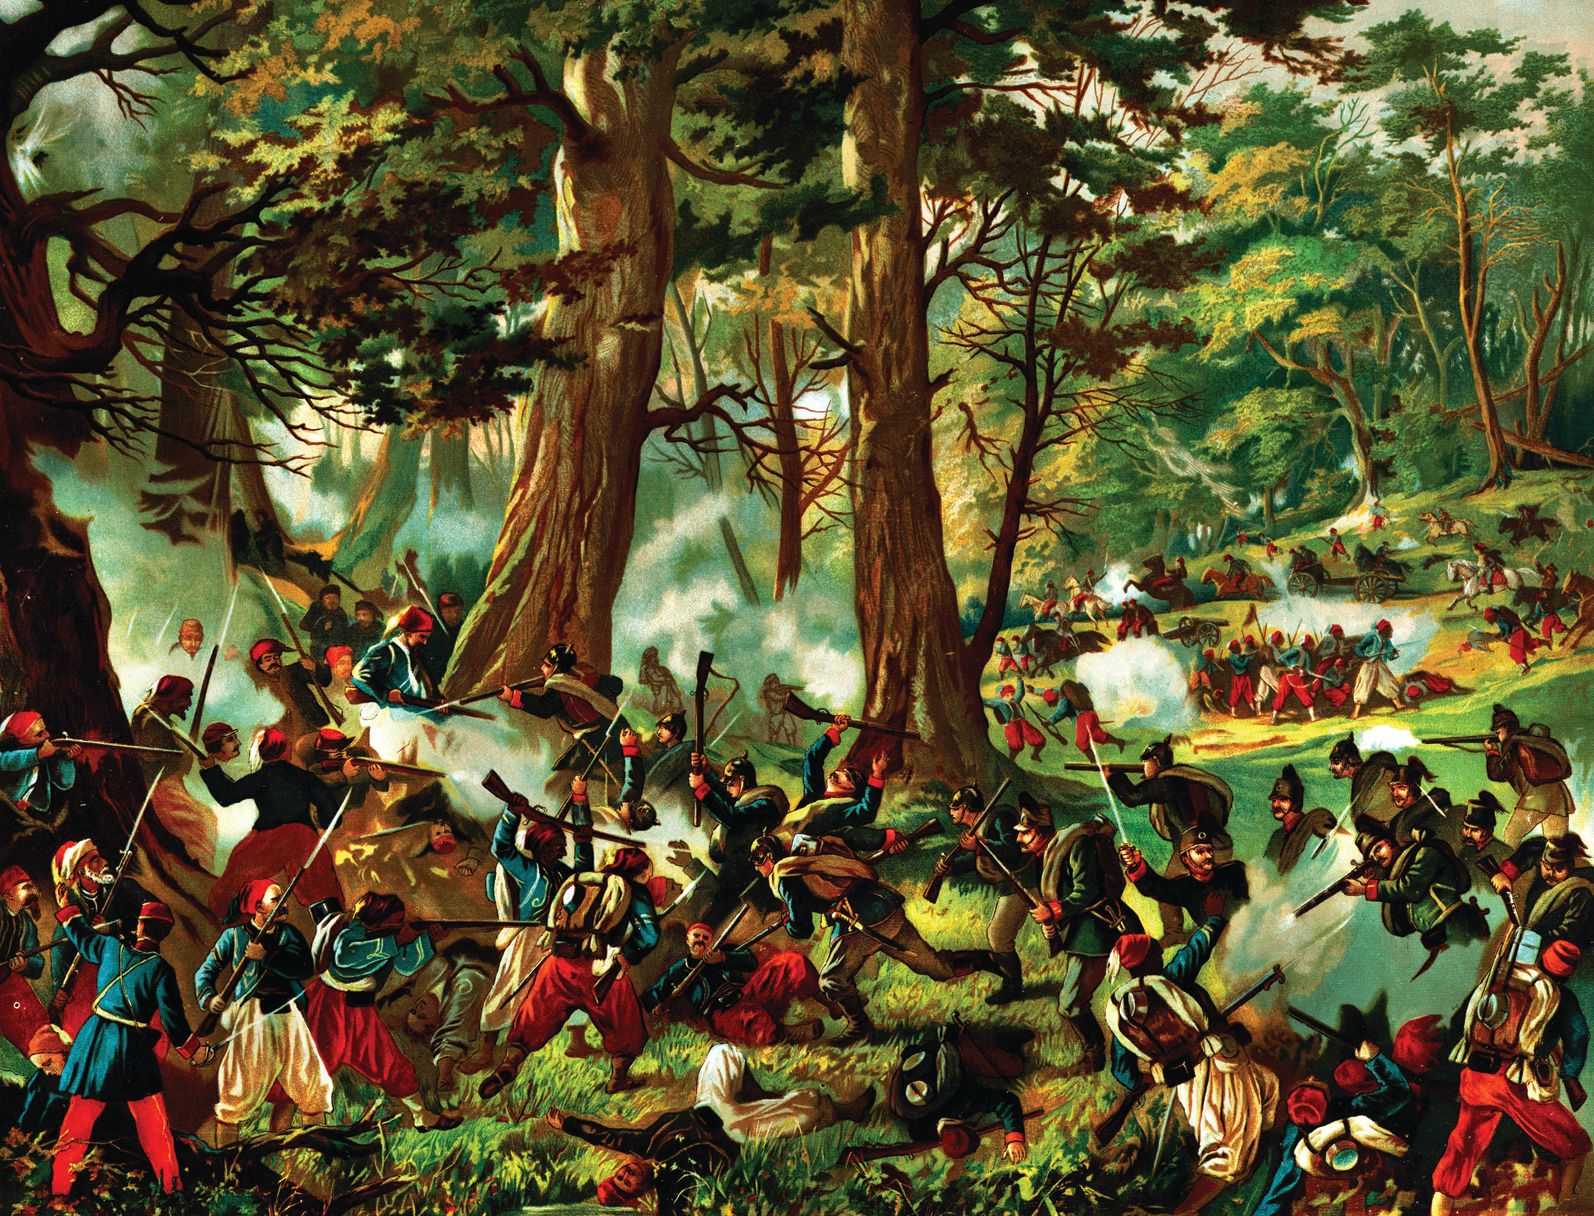 French Zouaves counterattack in the Bois de la Garenne north of the fortress, but are decimated by Prussian breech-loading artillery. Prussian gunners fired into the canopies of the trees so that shrapnel and splinters rained down on the French. 